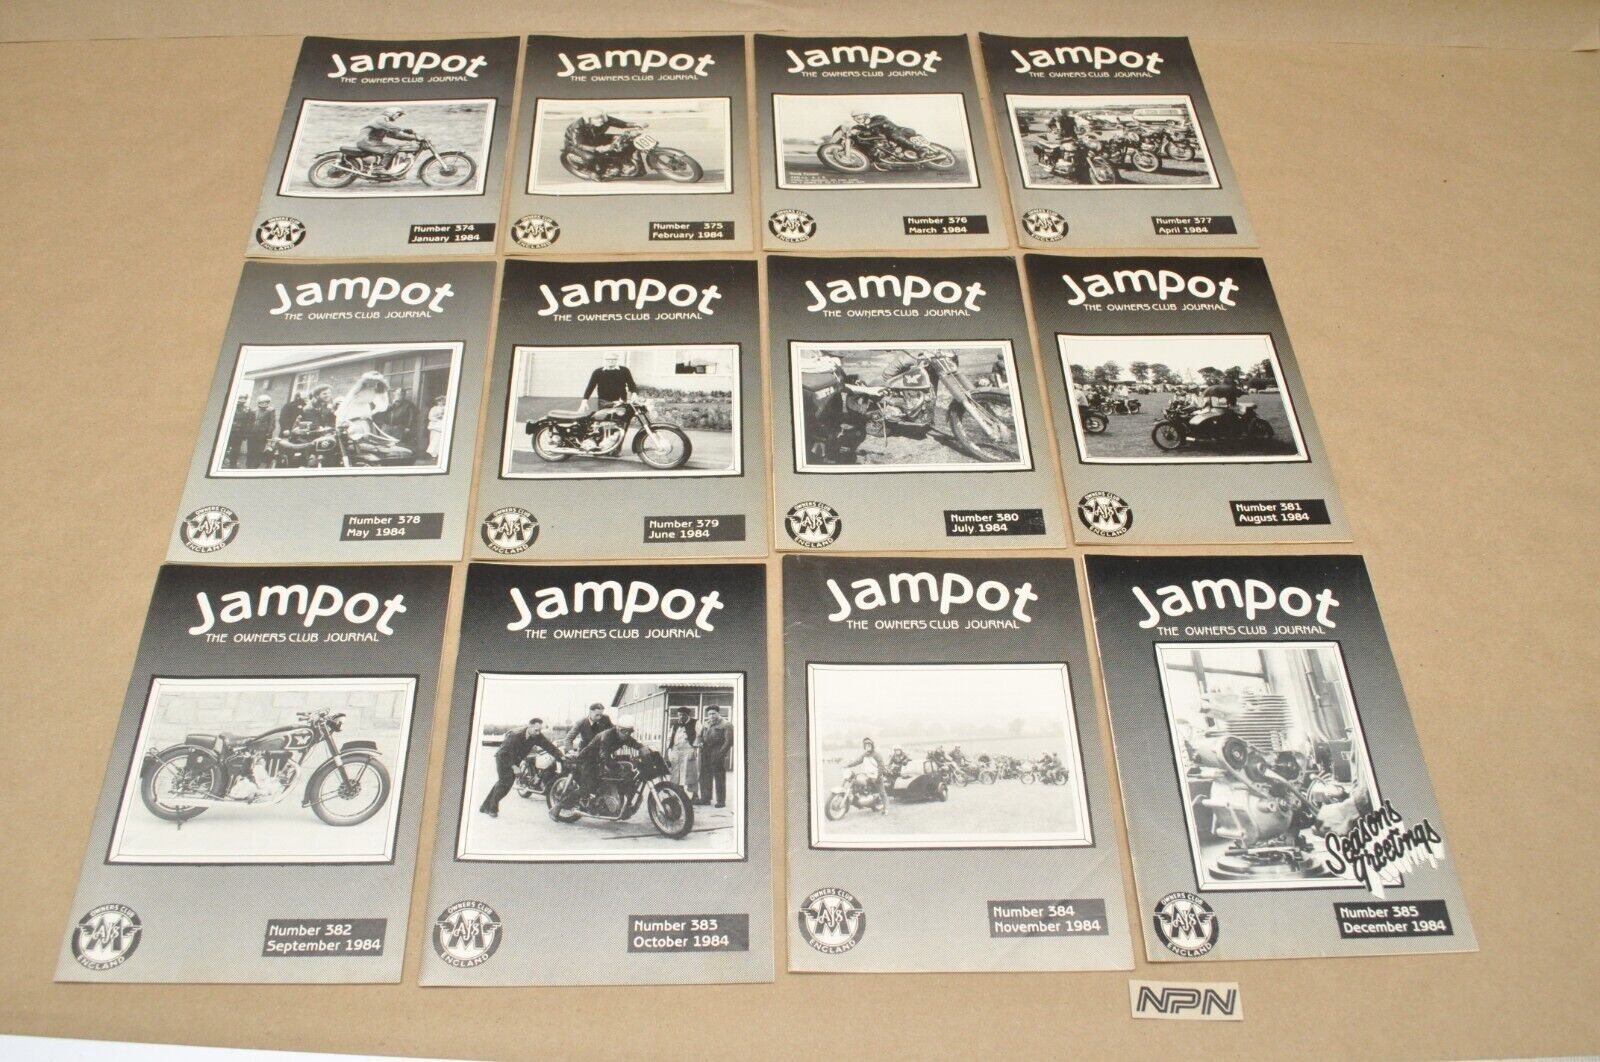 Vtg AJS Matchless Motorcycle Owners Club Jampot Journal Magazine 1984 FULL YEAR